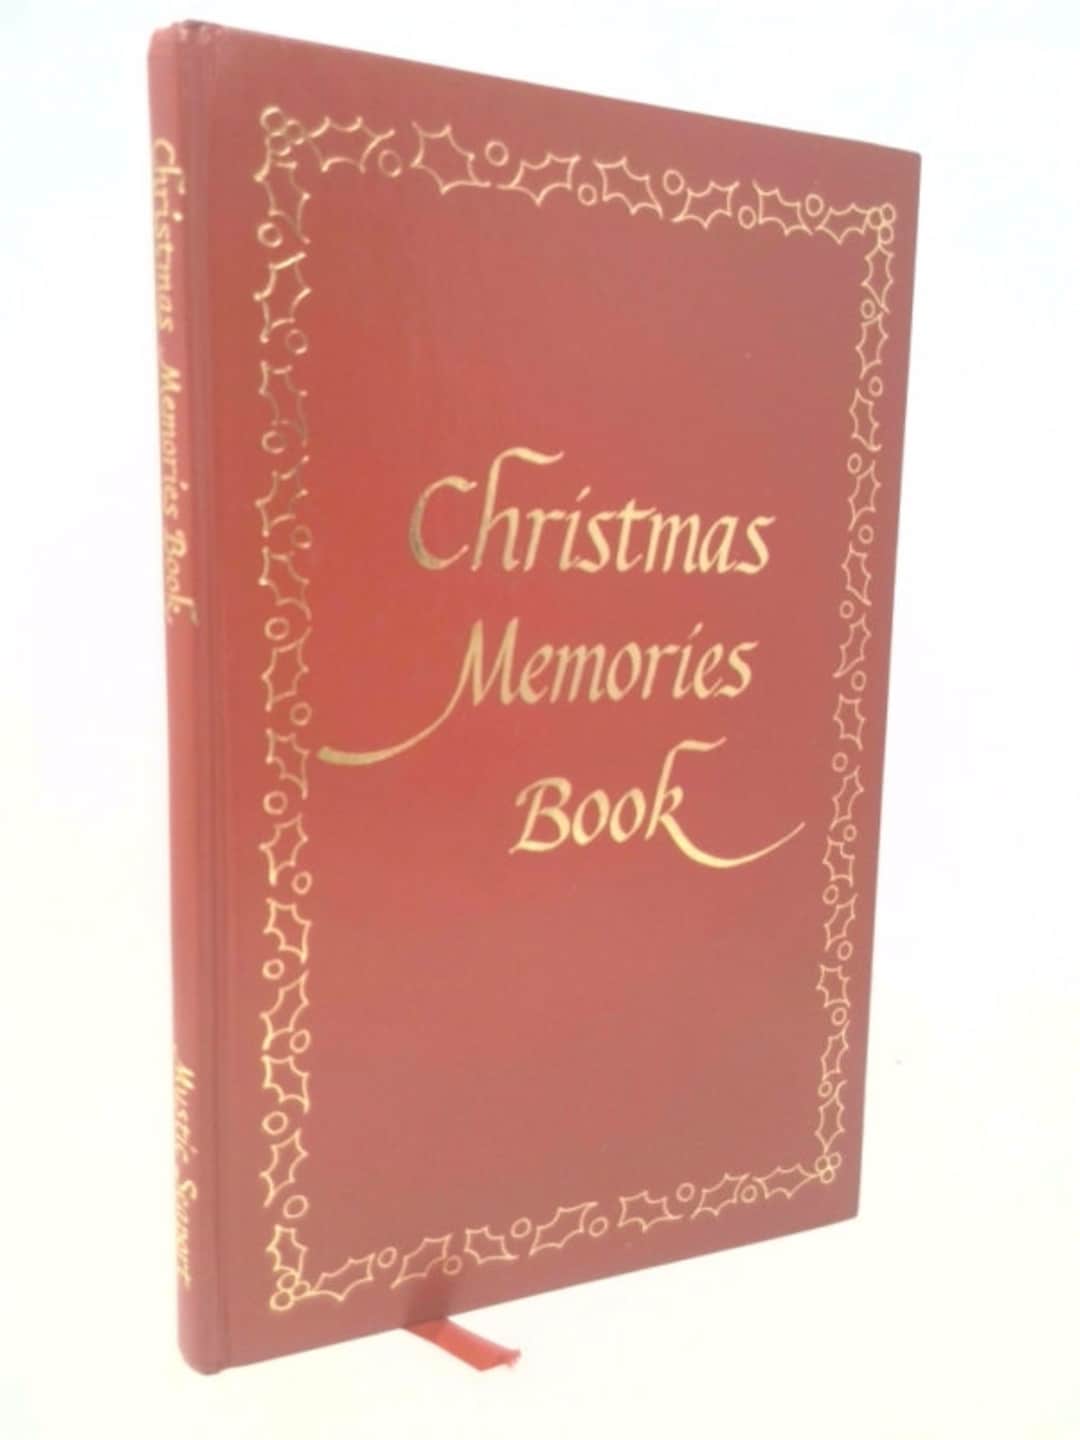 Christmas Memories Book by Applewood Books 